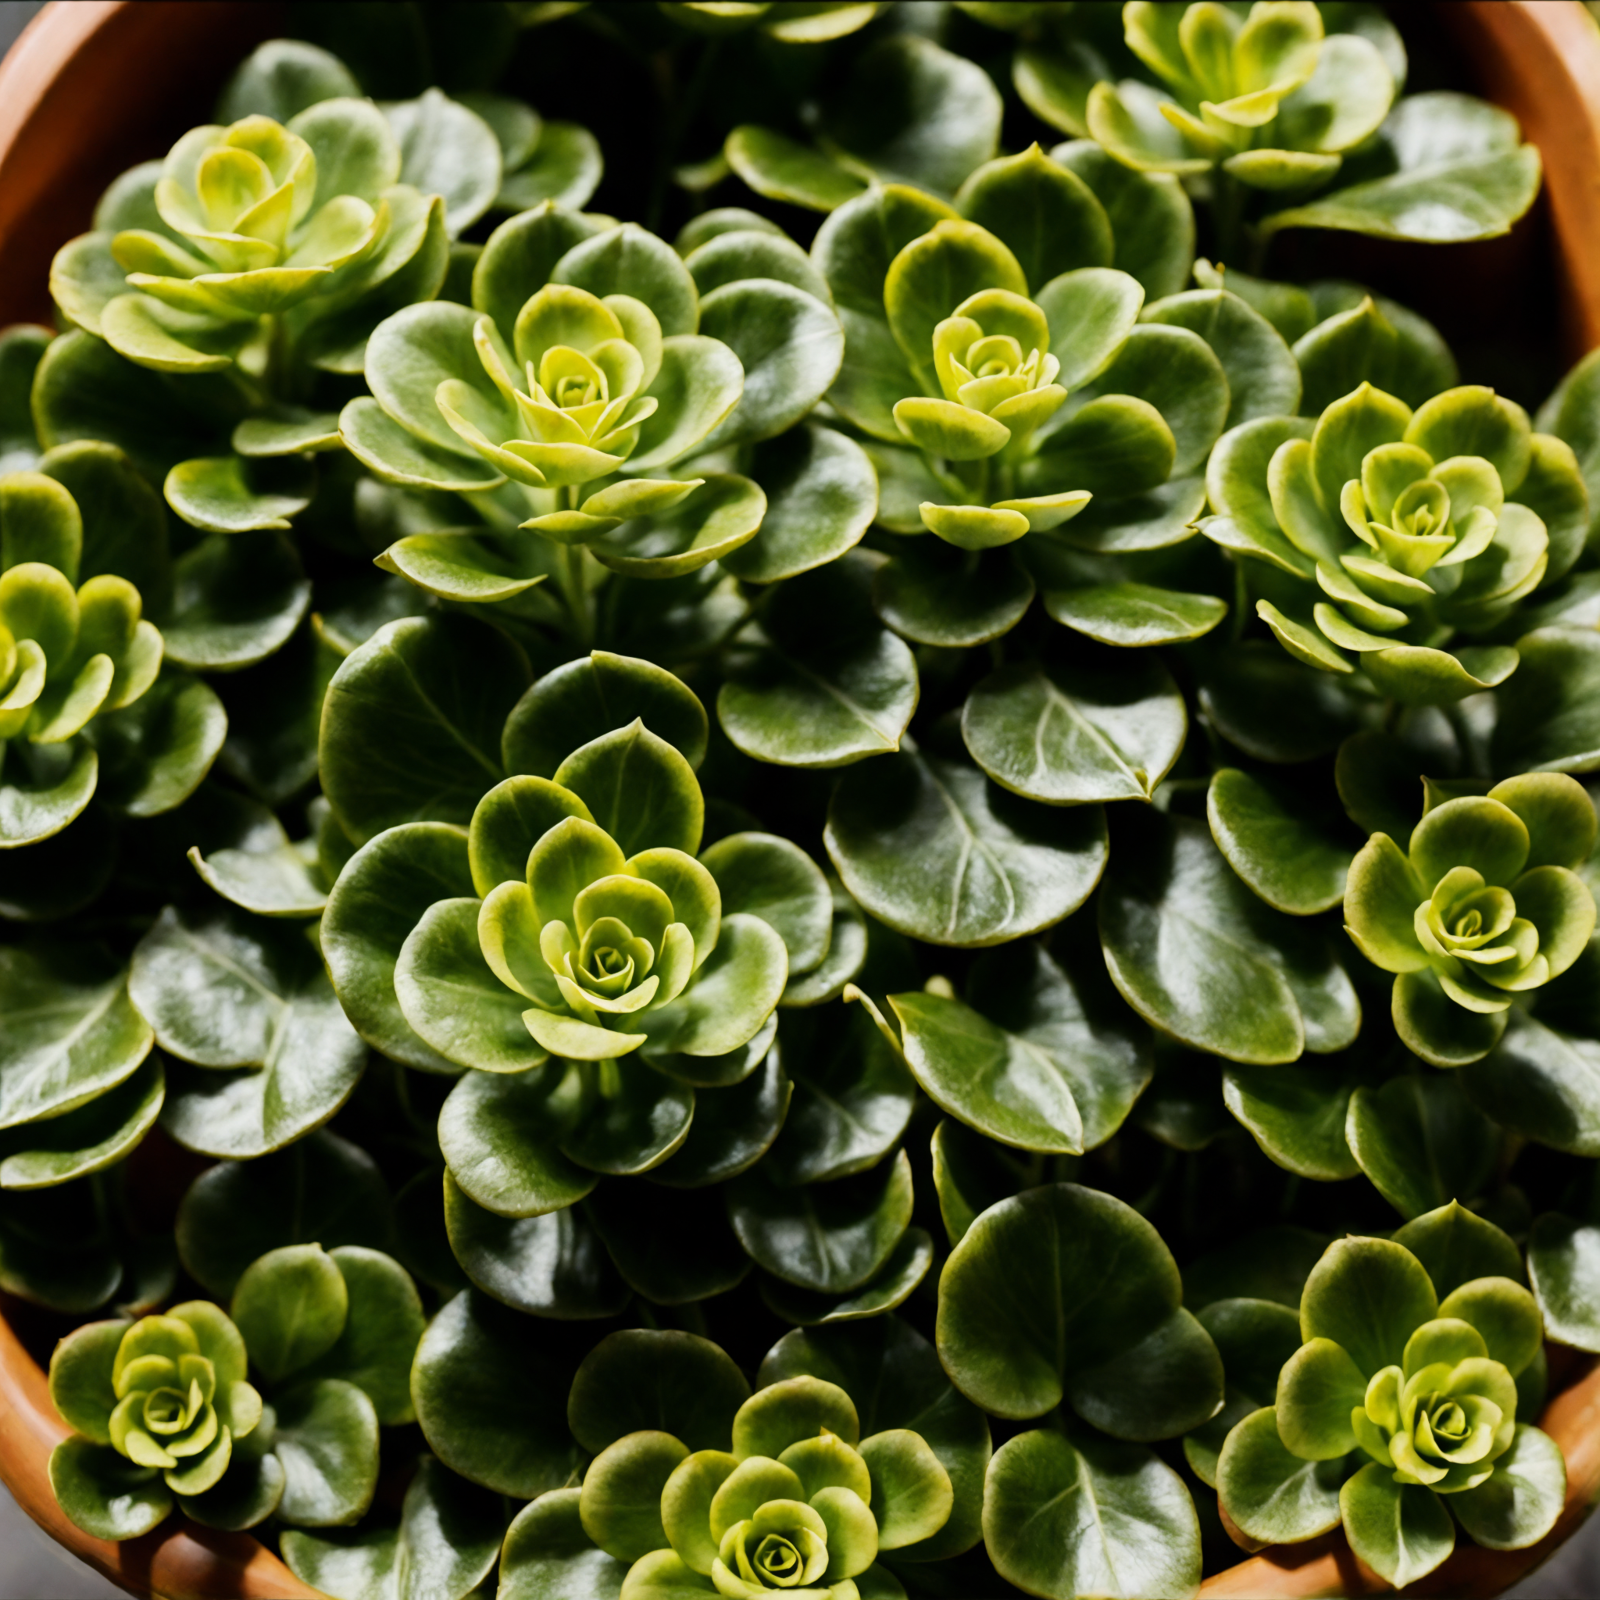 Sedum makinoi in a bowl, with lush green leaves, clear lighting, against a dark background.